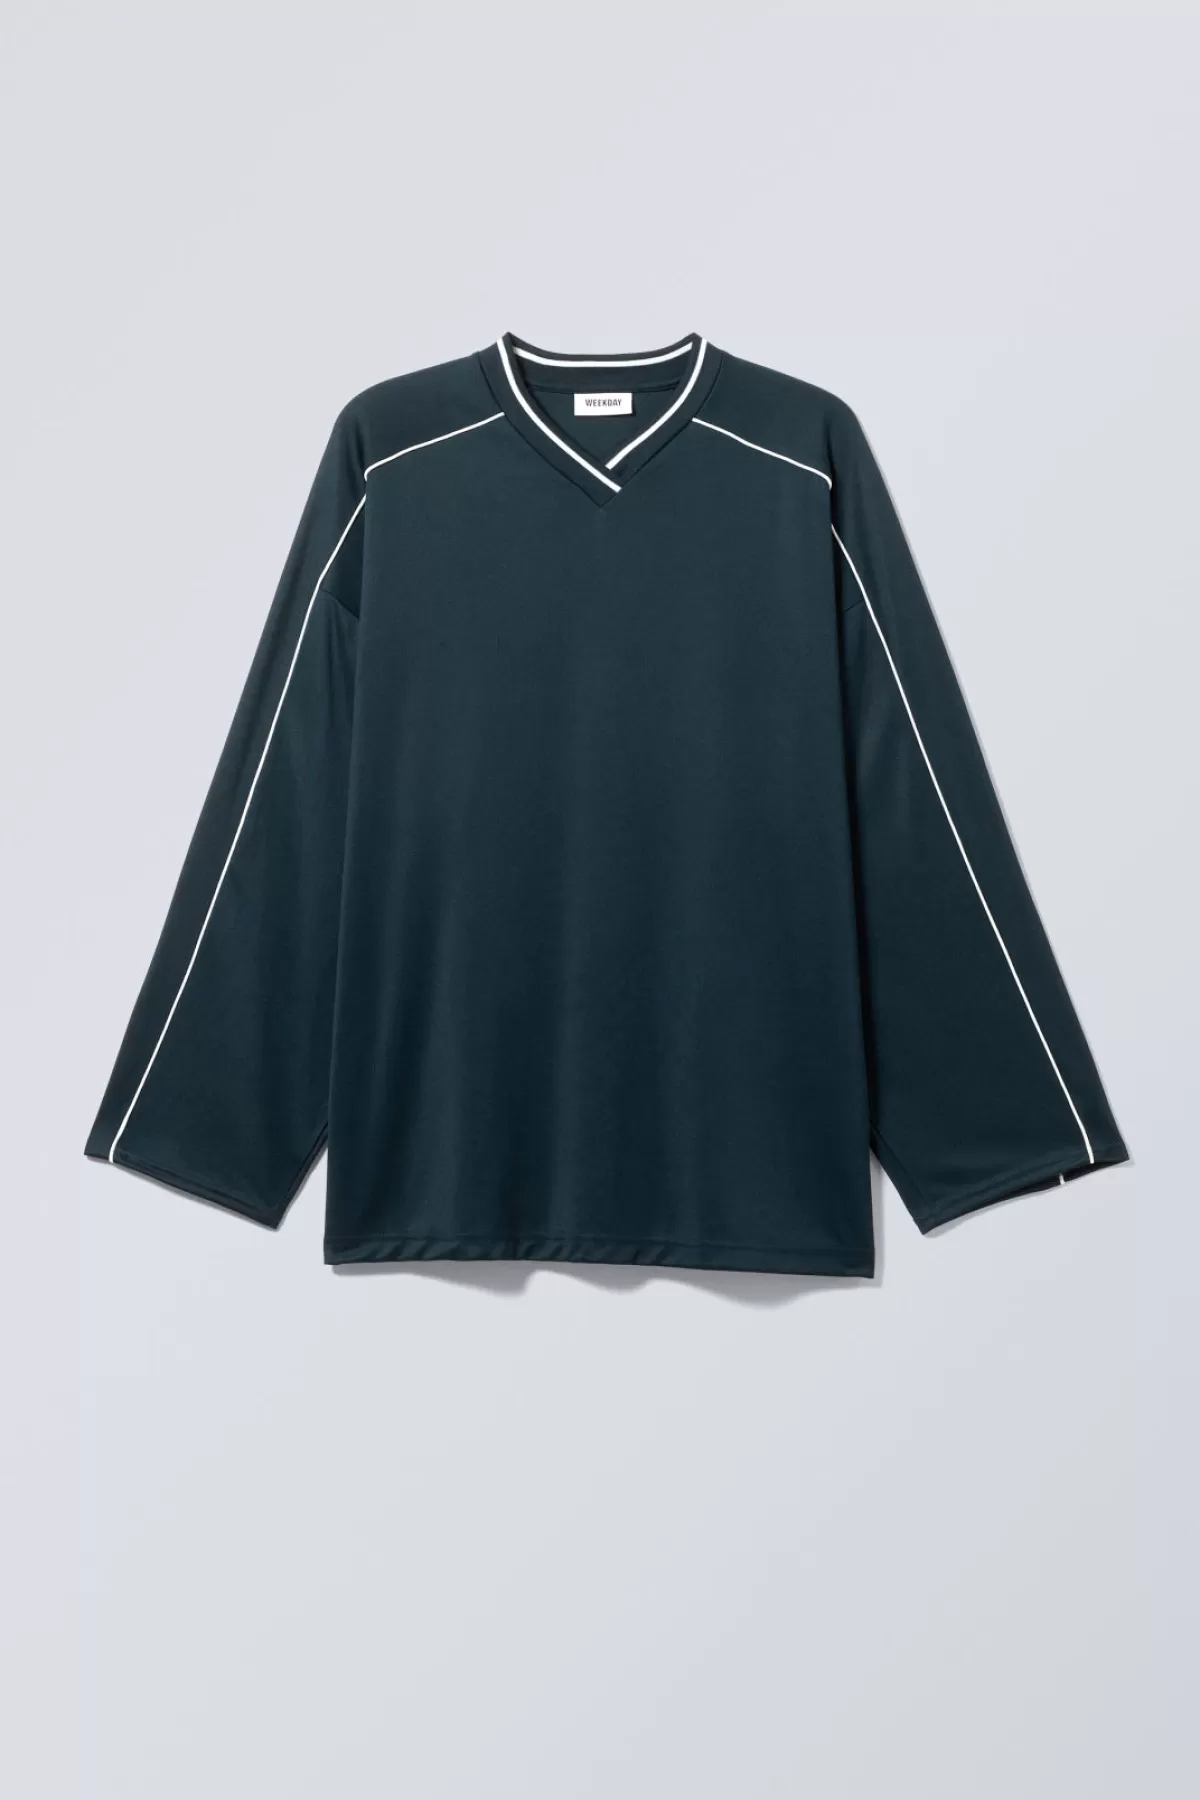 Weekday Oversized Sporty V- neck Sweater Discount